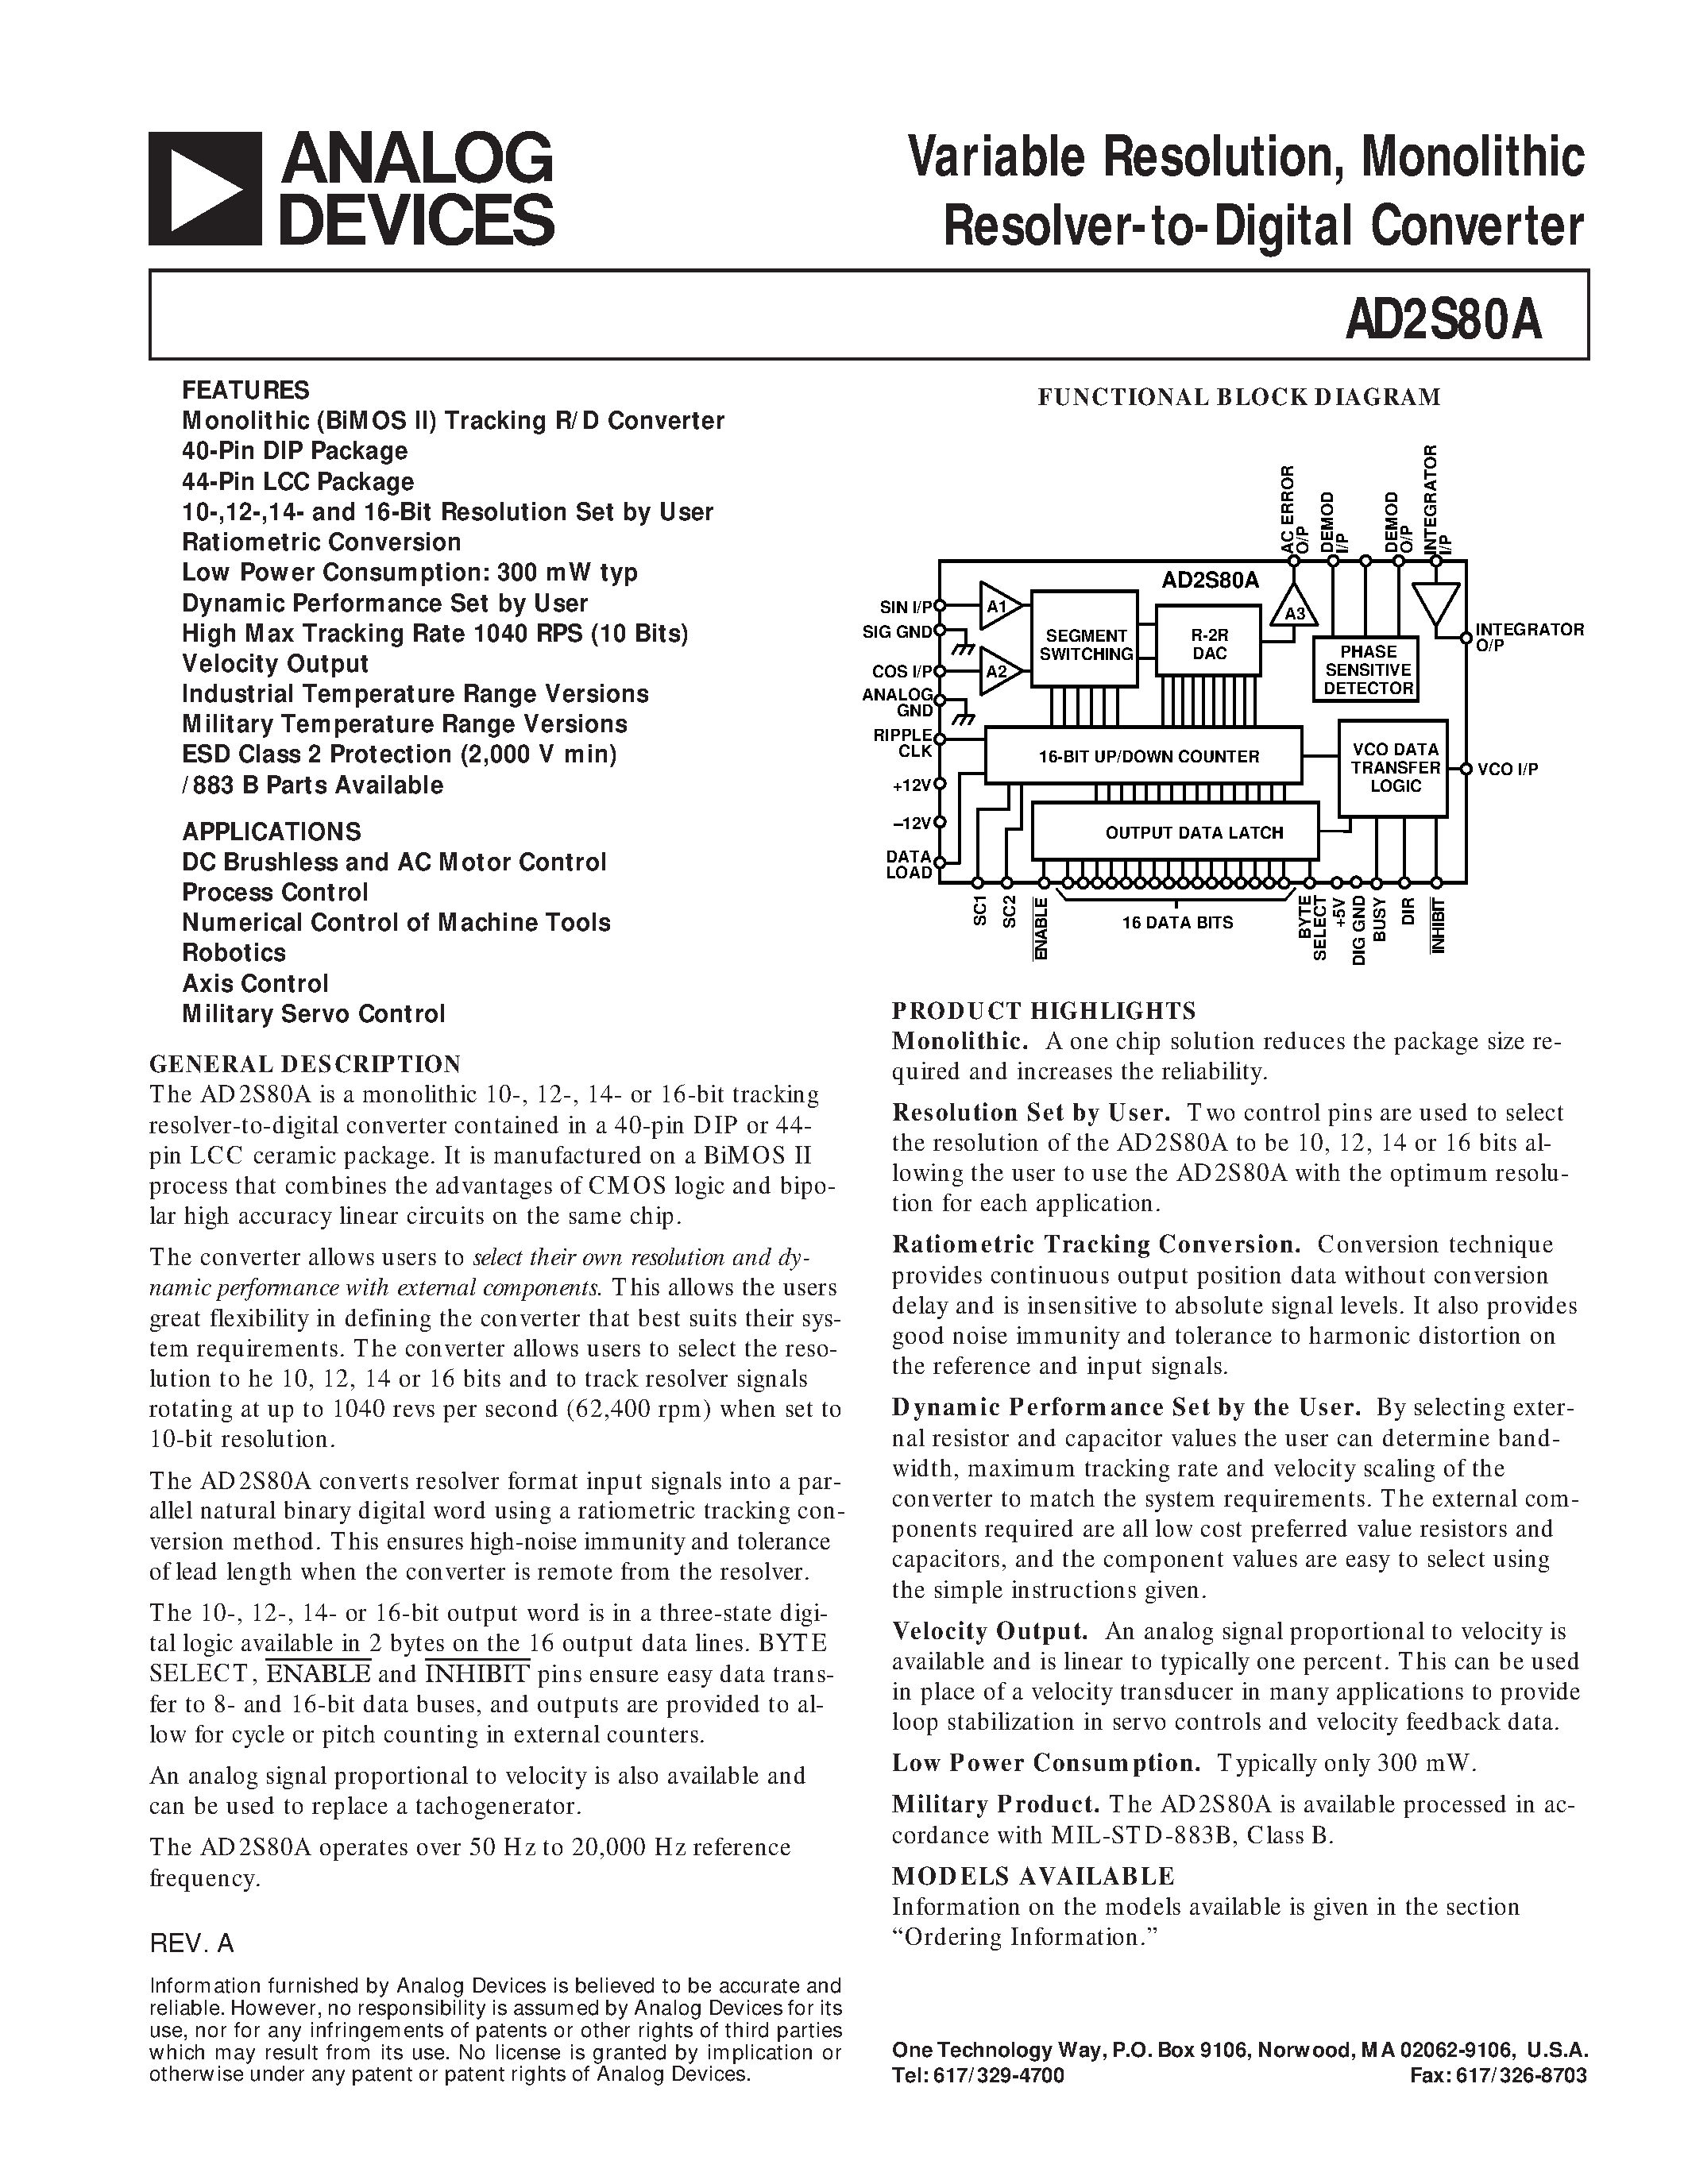 Datasheet AD2S80 - Variable Resolution/ Monolithic Resolver-to-Digital Converter page 1